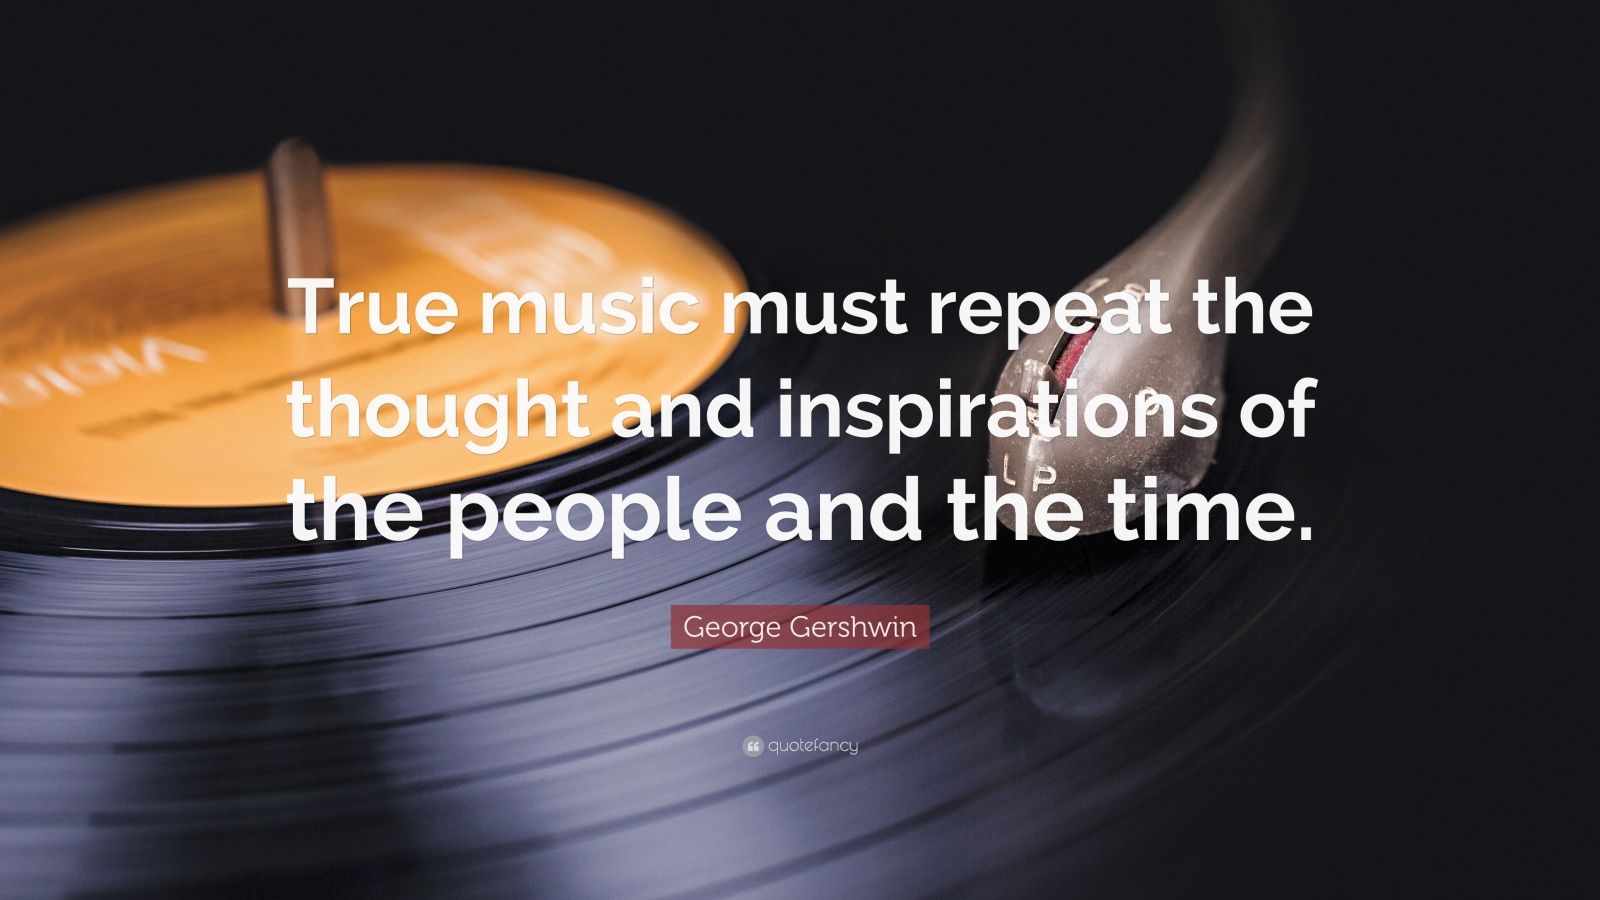 George Gershwin Quote: “True music must repeat the thought and ...